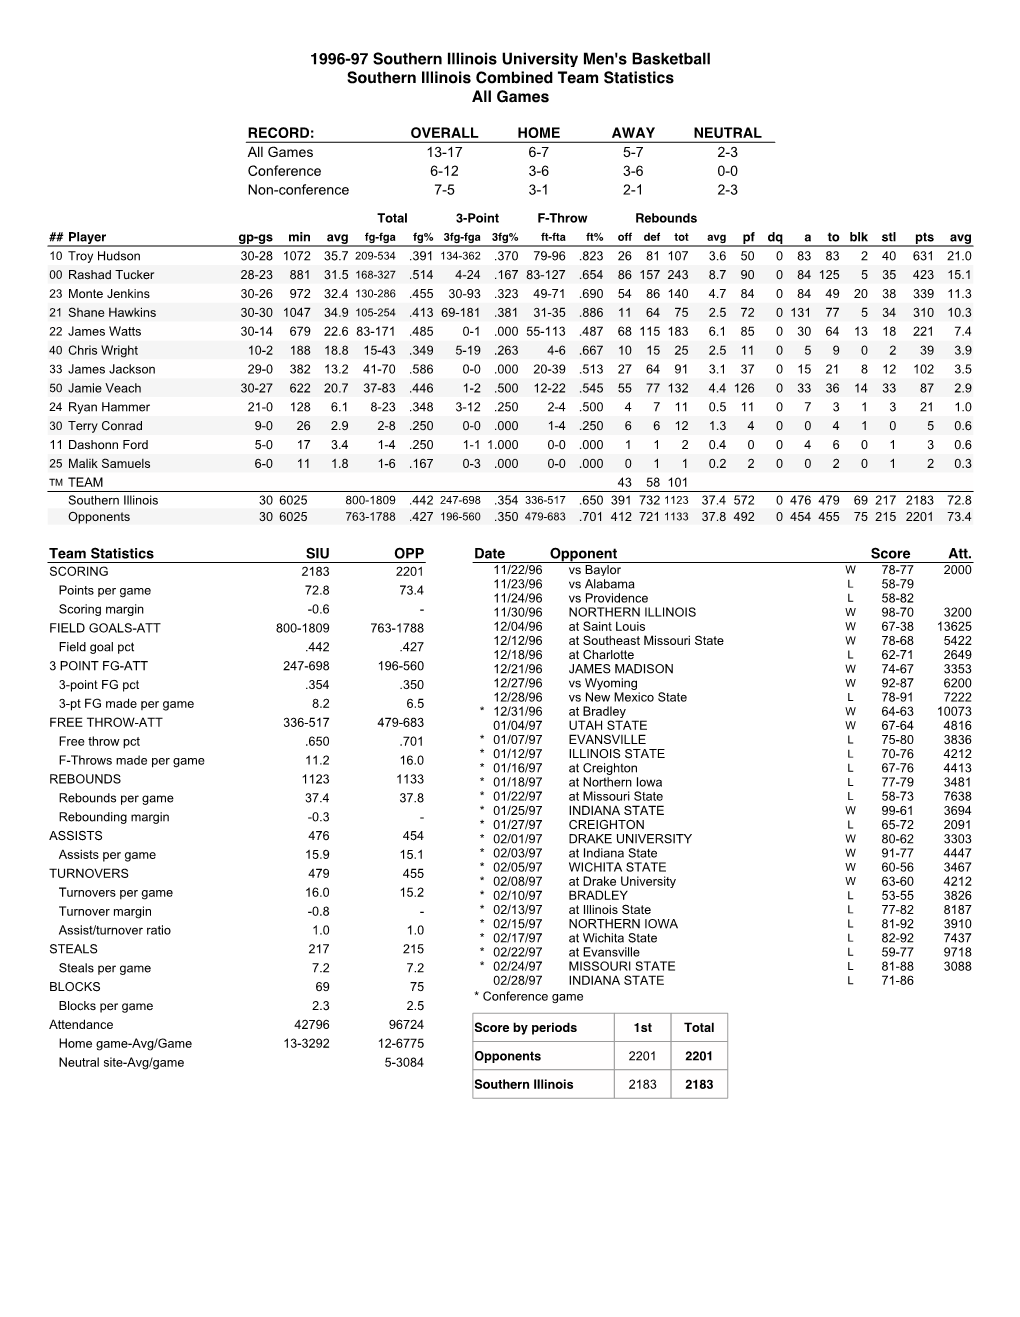 1996-97 Southern Illinois University Men's Basketball Southern Illinois Combined Team Statistics All Games